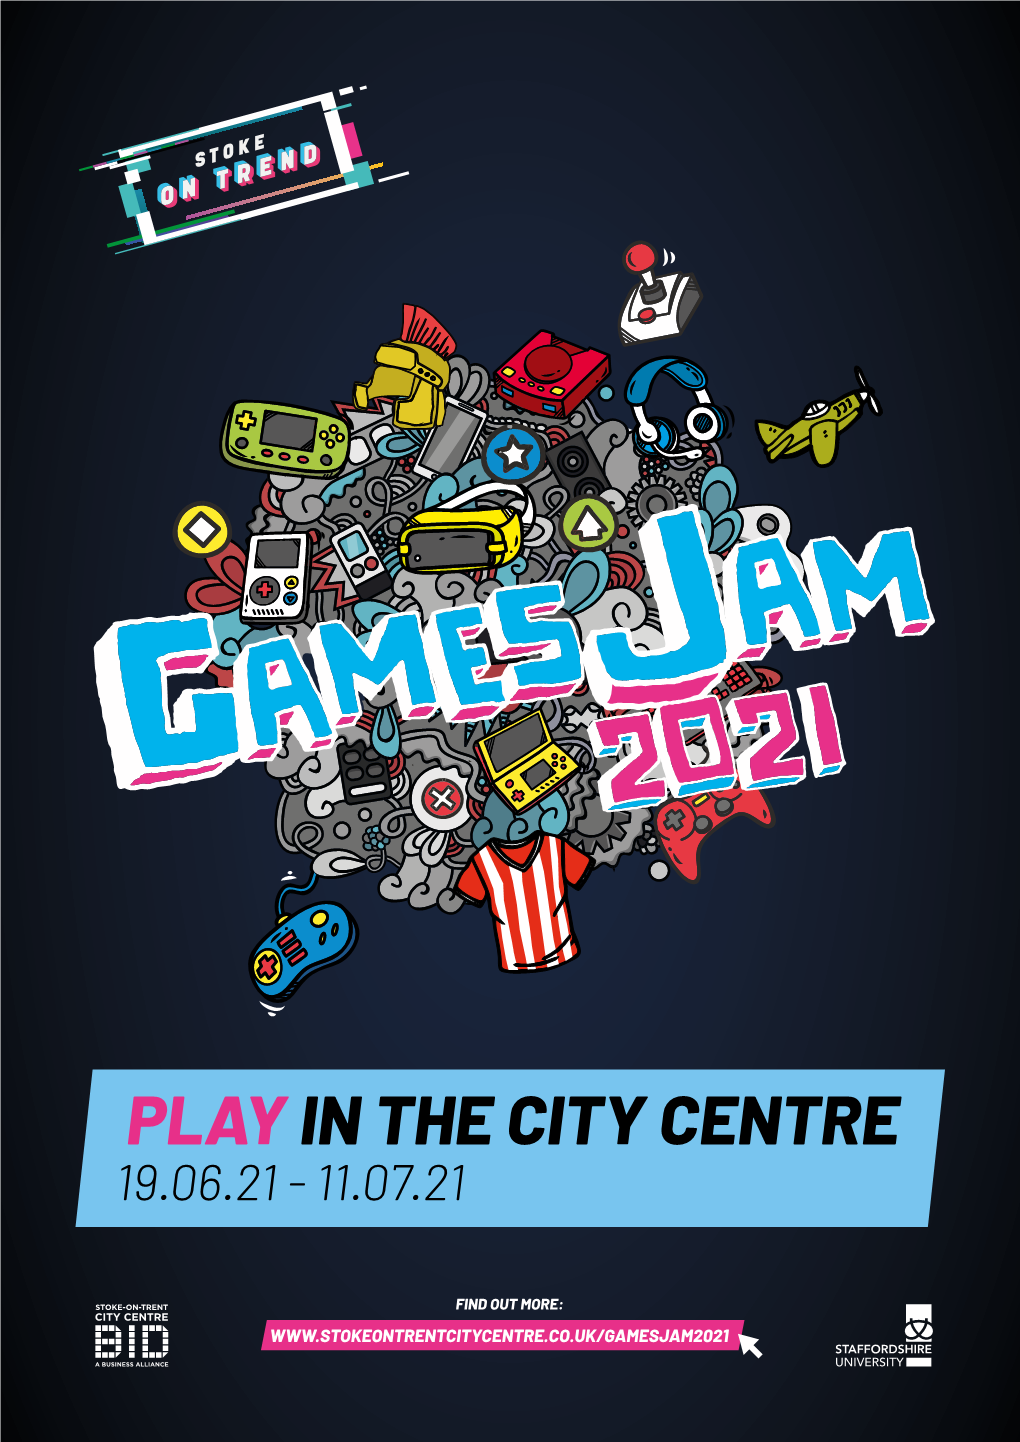 Play in the City Centre 19.06.21 - 11.07.21